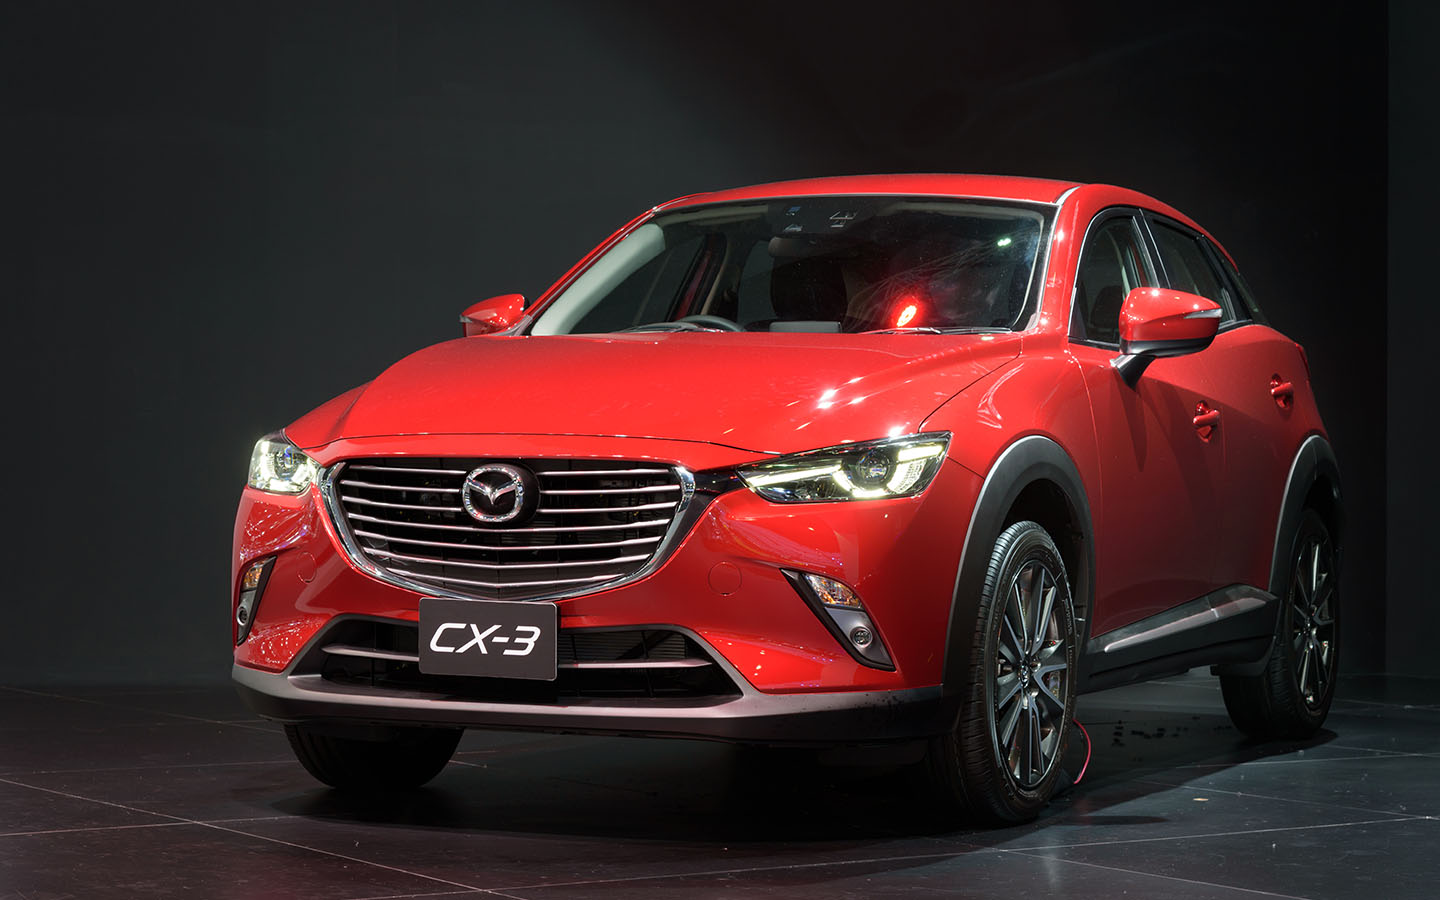 Mazda CX-3 ranks last on the list of top used Mazda cars in the UAE 